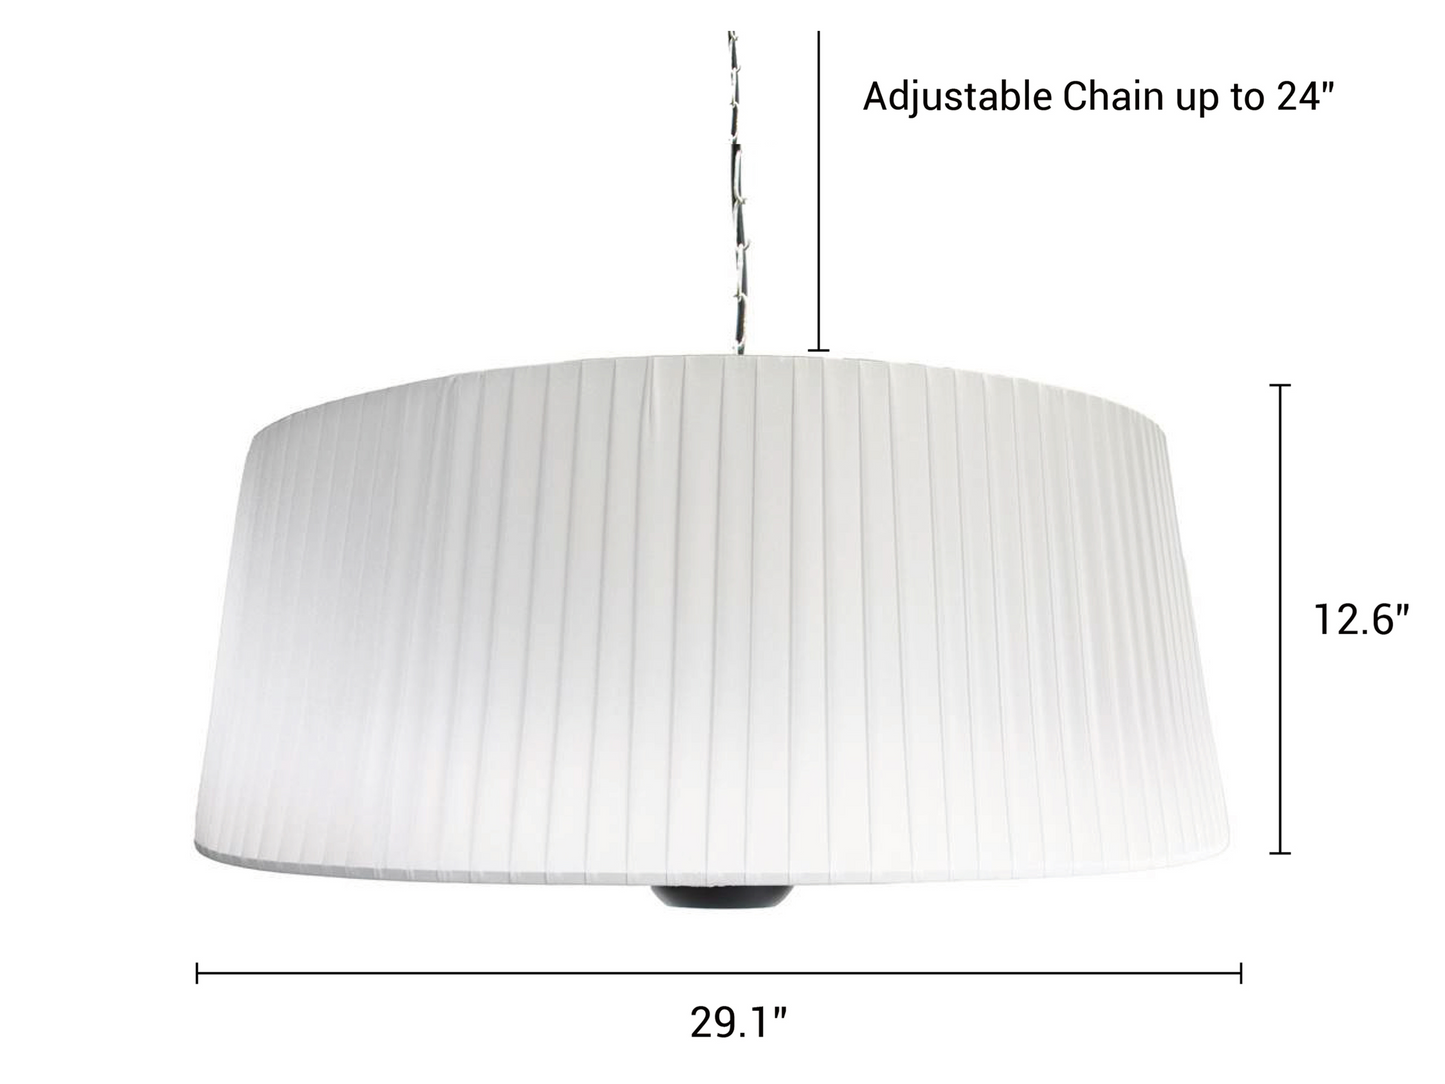 Glow Pendent Heater with dimensions, 12.6" Tall, 29.1" Wide with 24" adjustable chain